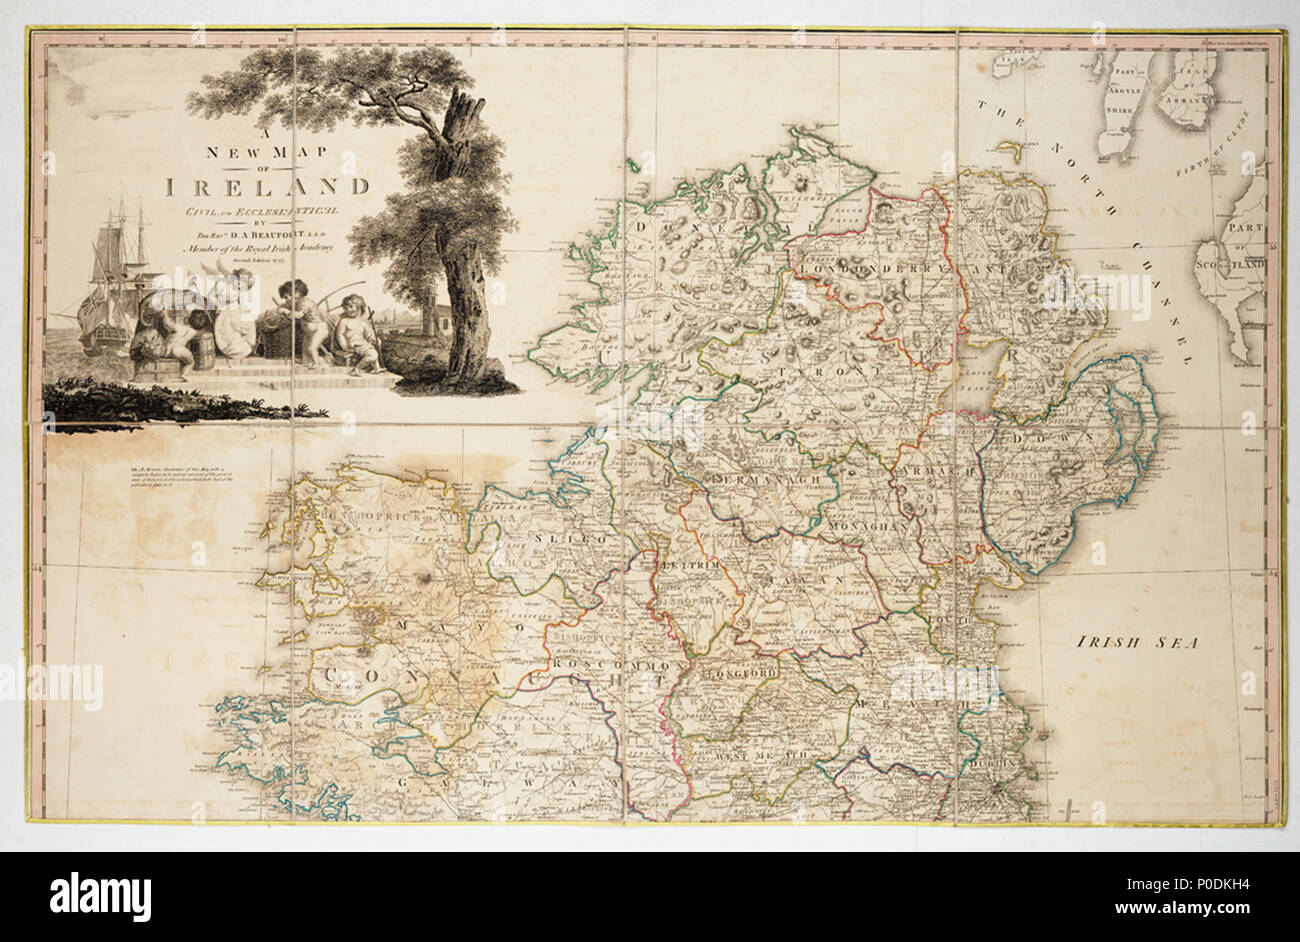 .  English: A new map of Ireland civil and ecclesiastical by the Rev.d D. A. Beaufort LLD Member of the Royal Irish Academy. 2nd Edn 1797Two sheets. Engr. Medium: Segmented and backed. Physical description Note: Coloured in outline. Scale: 1:500 000 (bar). Cartographic Note: Globular projection, meridian of Greenwich. Scales in Irish miles, English miles and French leagues. Contents Note: Dedicated to King George III. The cartouche shows cherubs with Irish produce and a cameo of George III on a quayside as a Royal Naval ship sails past. Ashore there is a church with its tower in scaffolding an Stock Photo